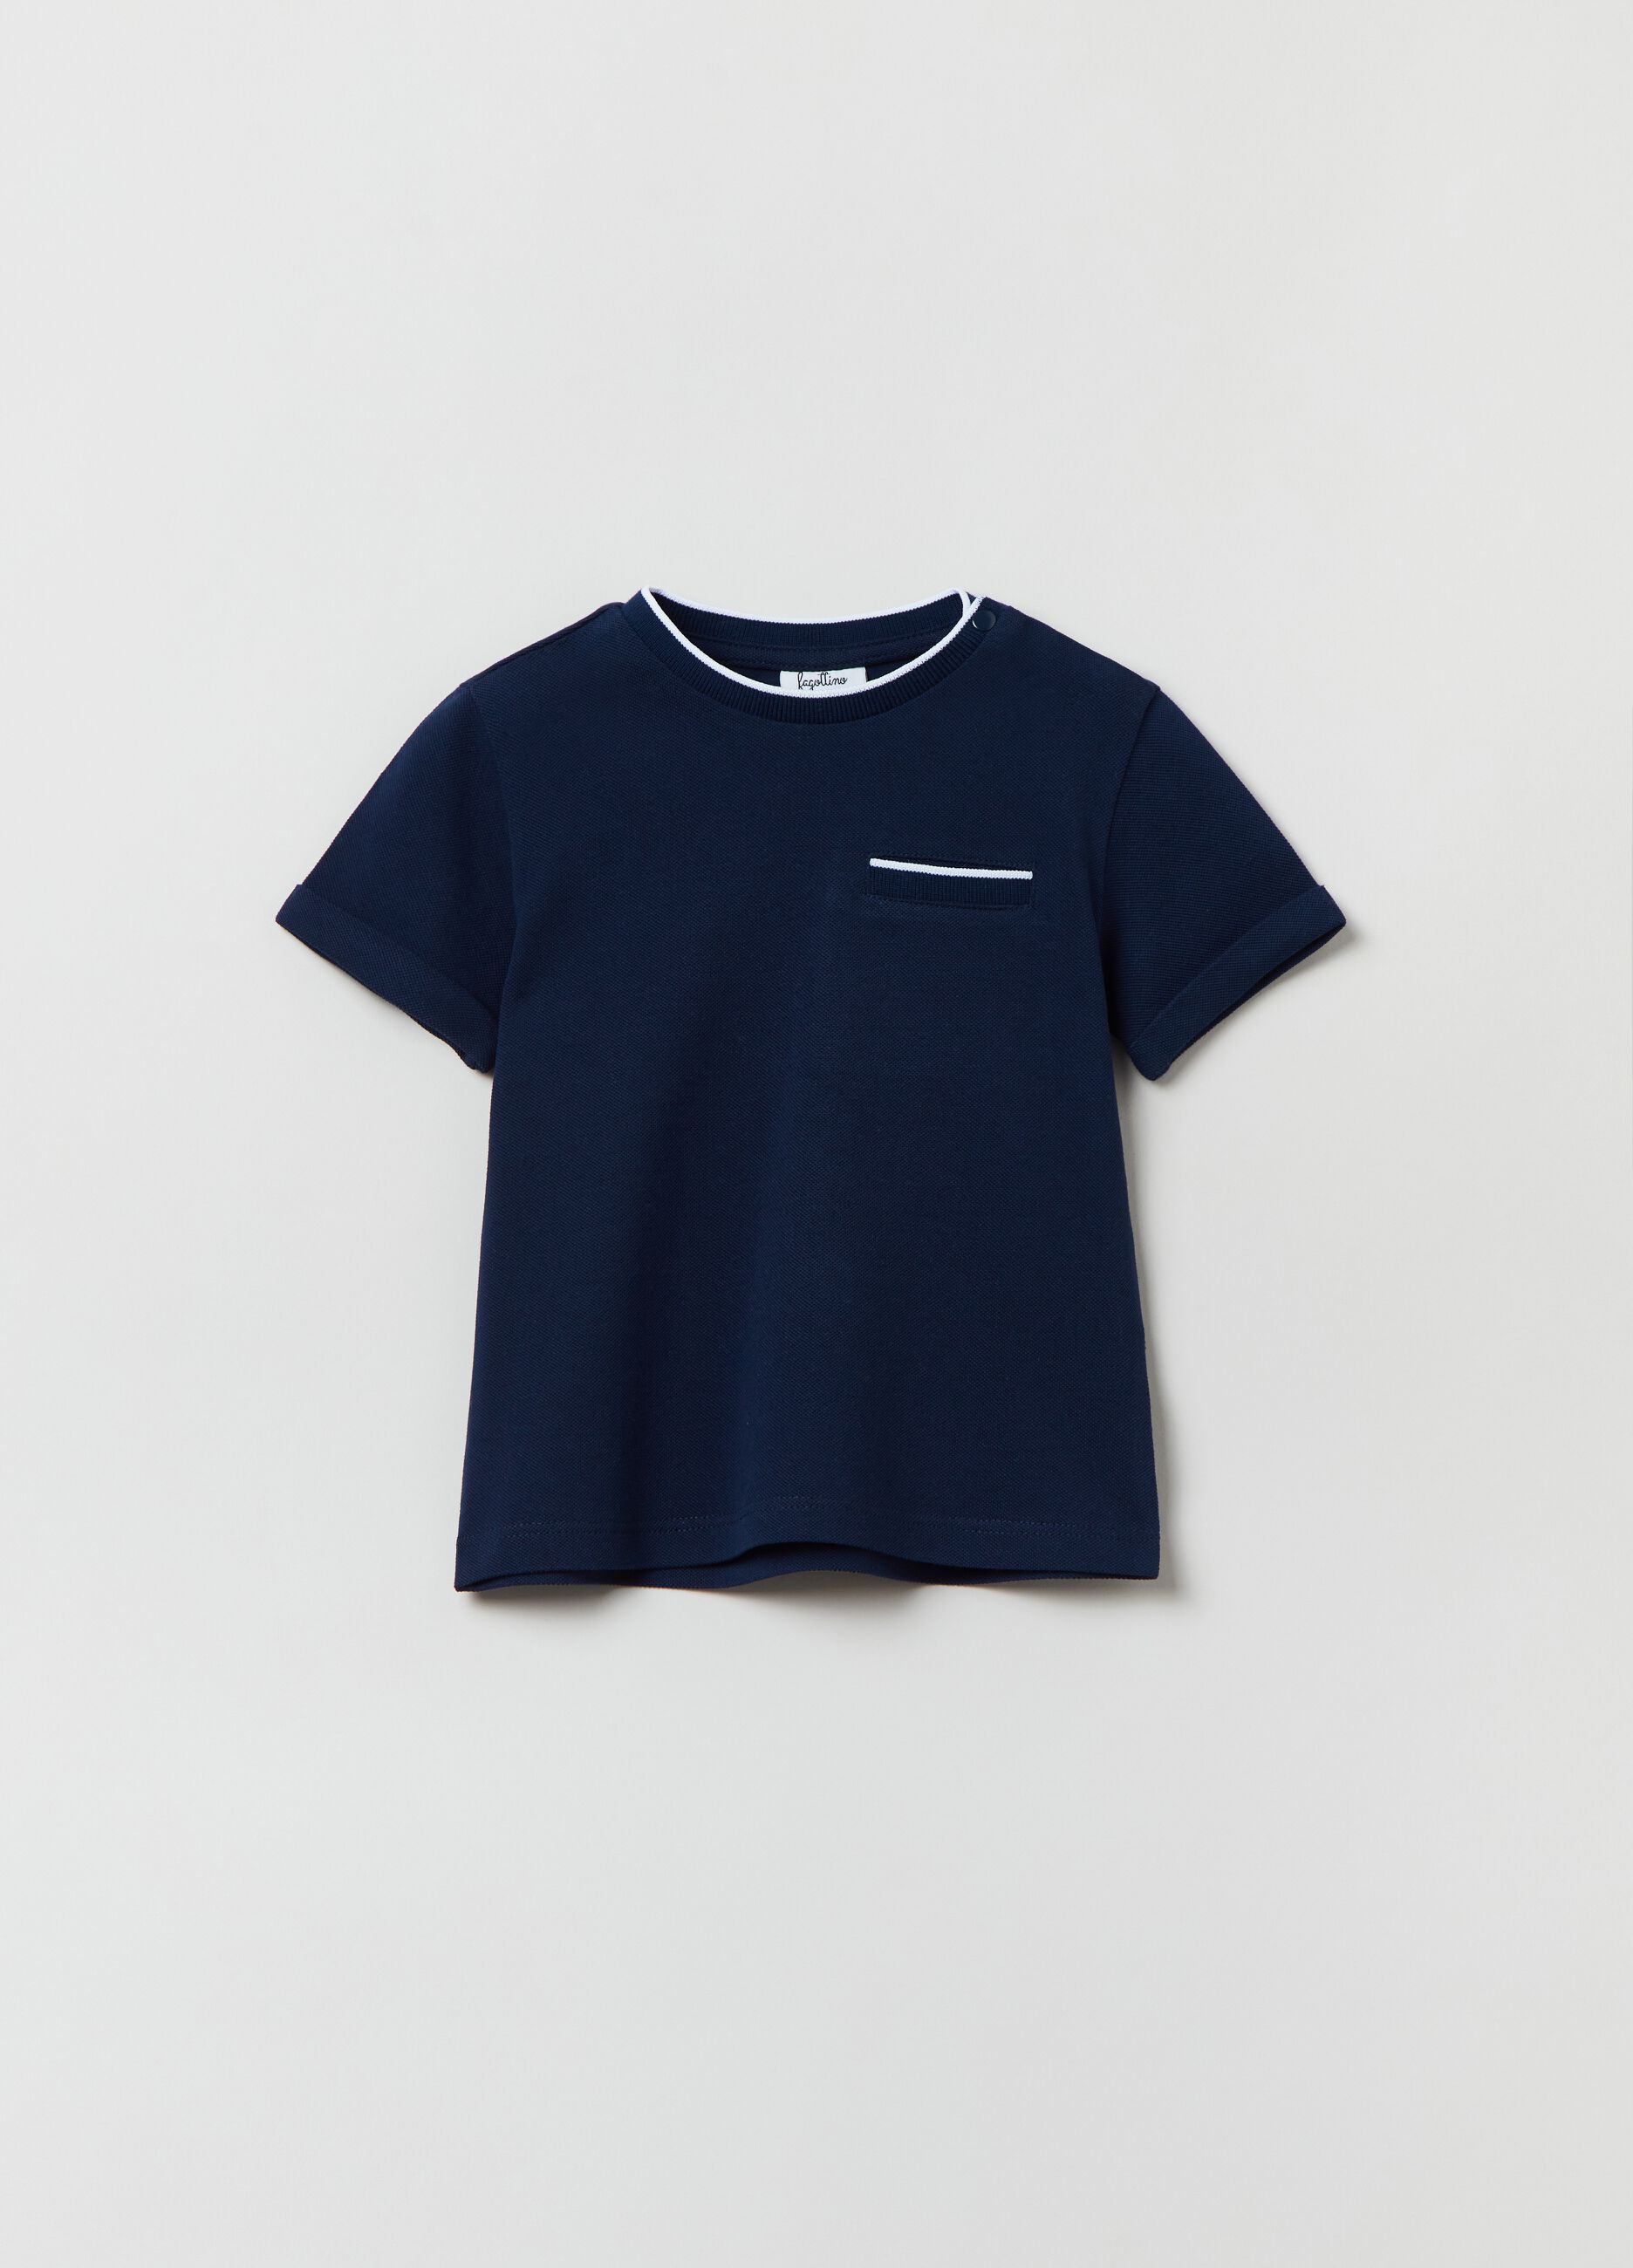 T-shirt in piquet with contrasting trims